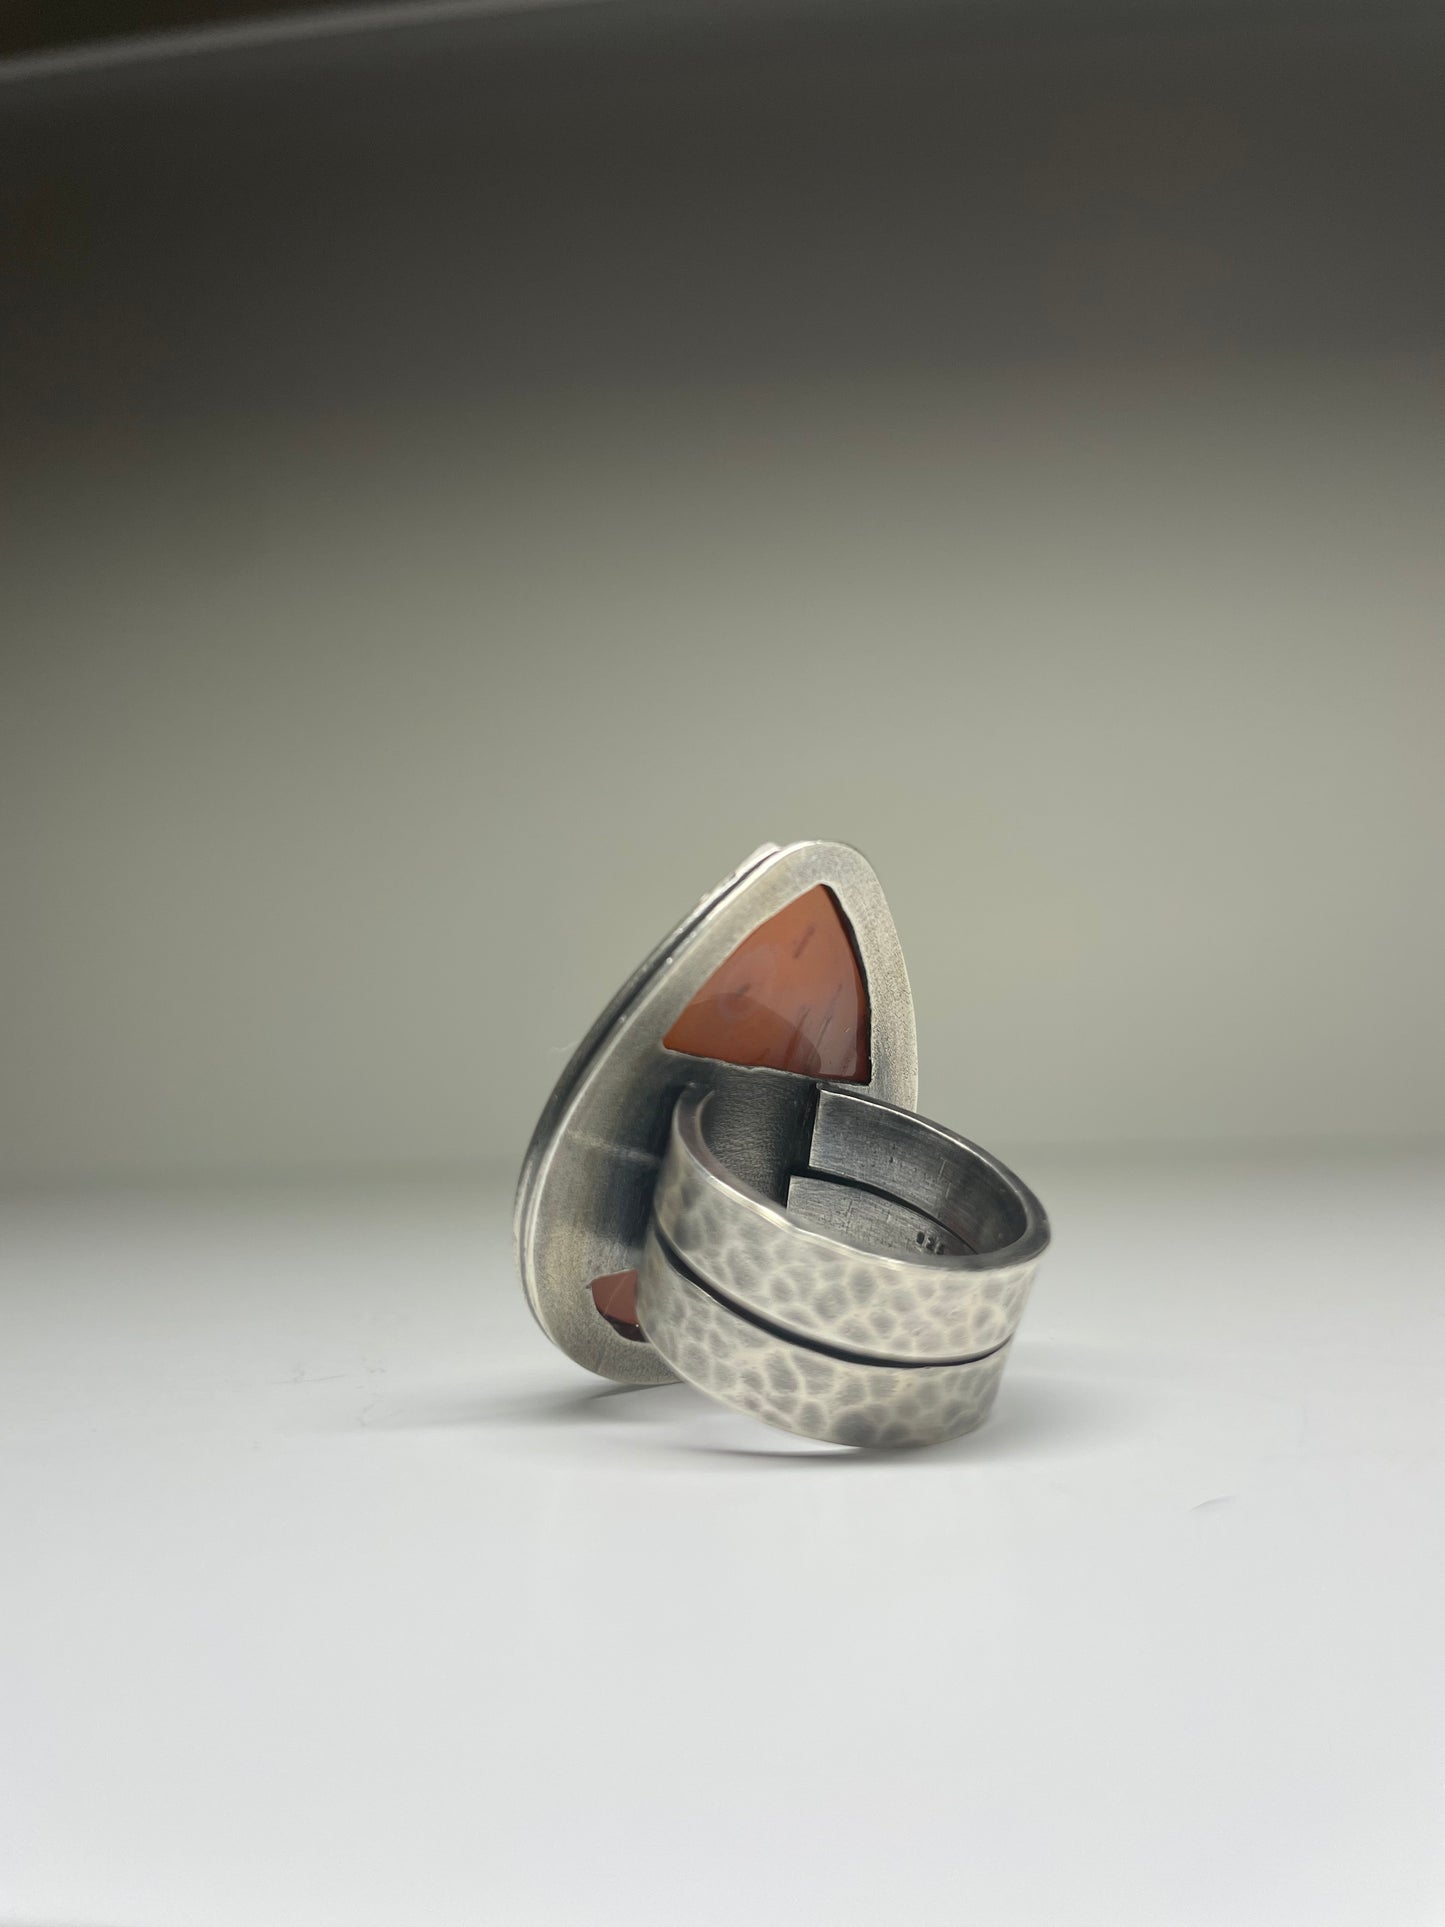 Tube Agate and Sterling Ring - US 8